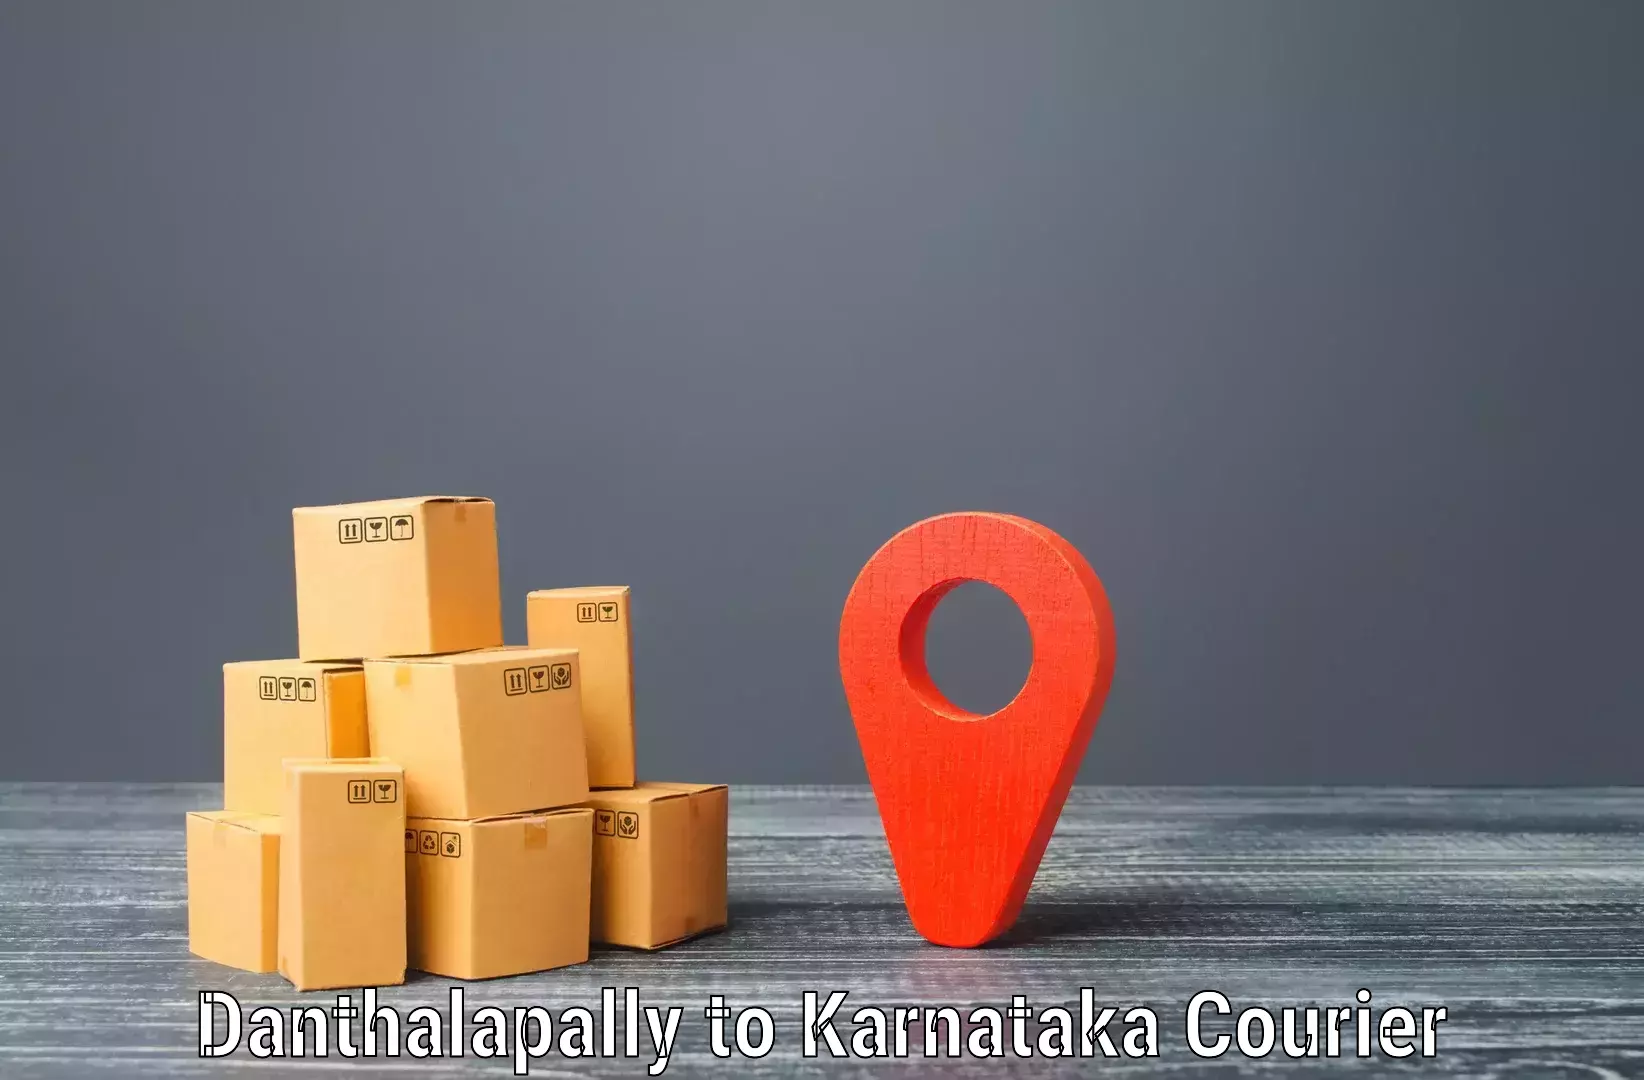 24/7 courier service Danthalapally to Madikeri